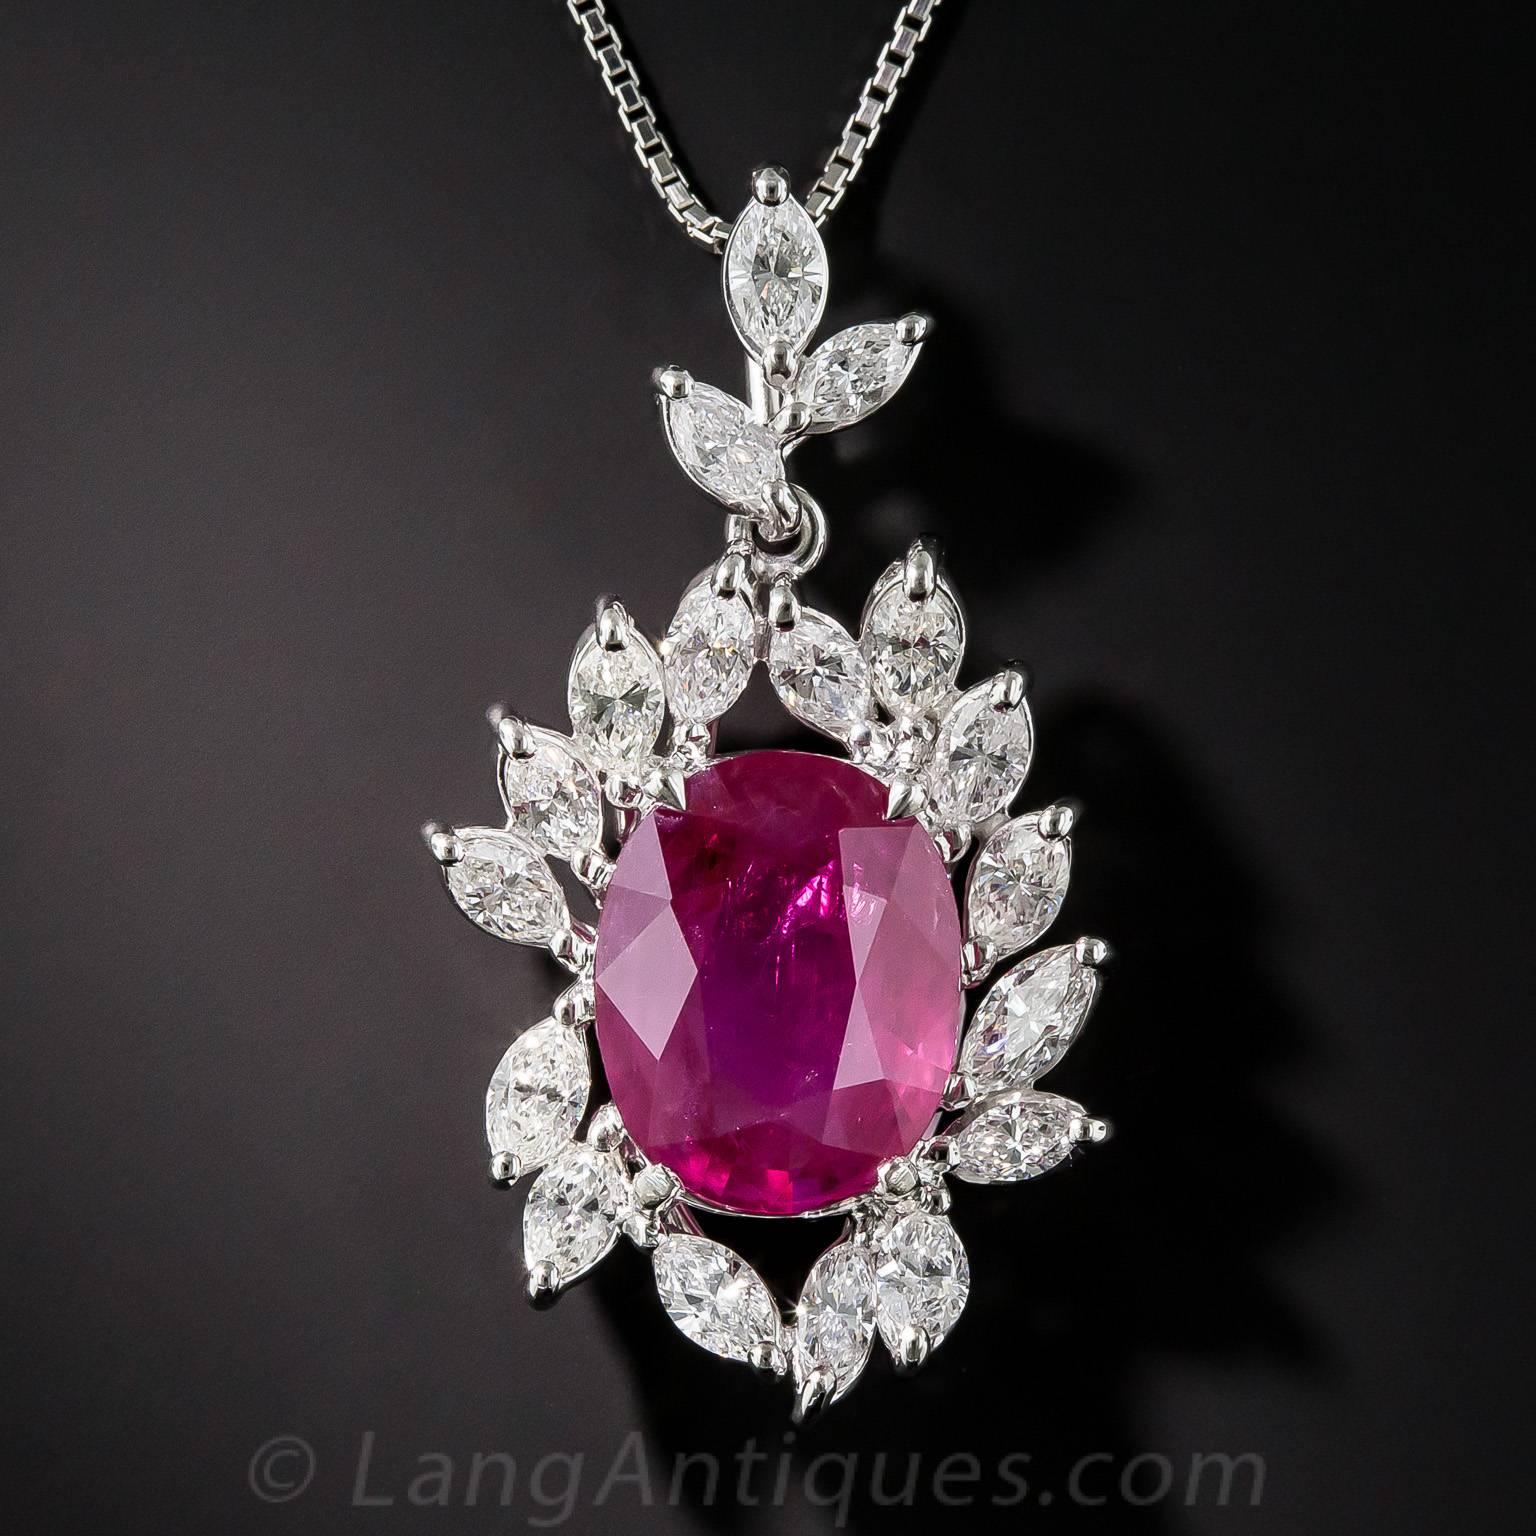 Stunning! A beautiful bright and vibrant faceted oval Burmese ruby, weighing in at an impressive (and lucky) 7.71 carats. The magnificent gemstone glistens and glows from within a sparkling frame composed of bright white marquise diamonds, totaling